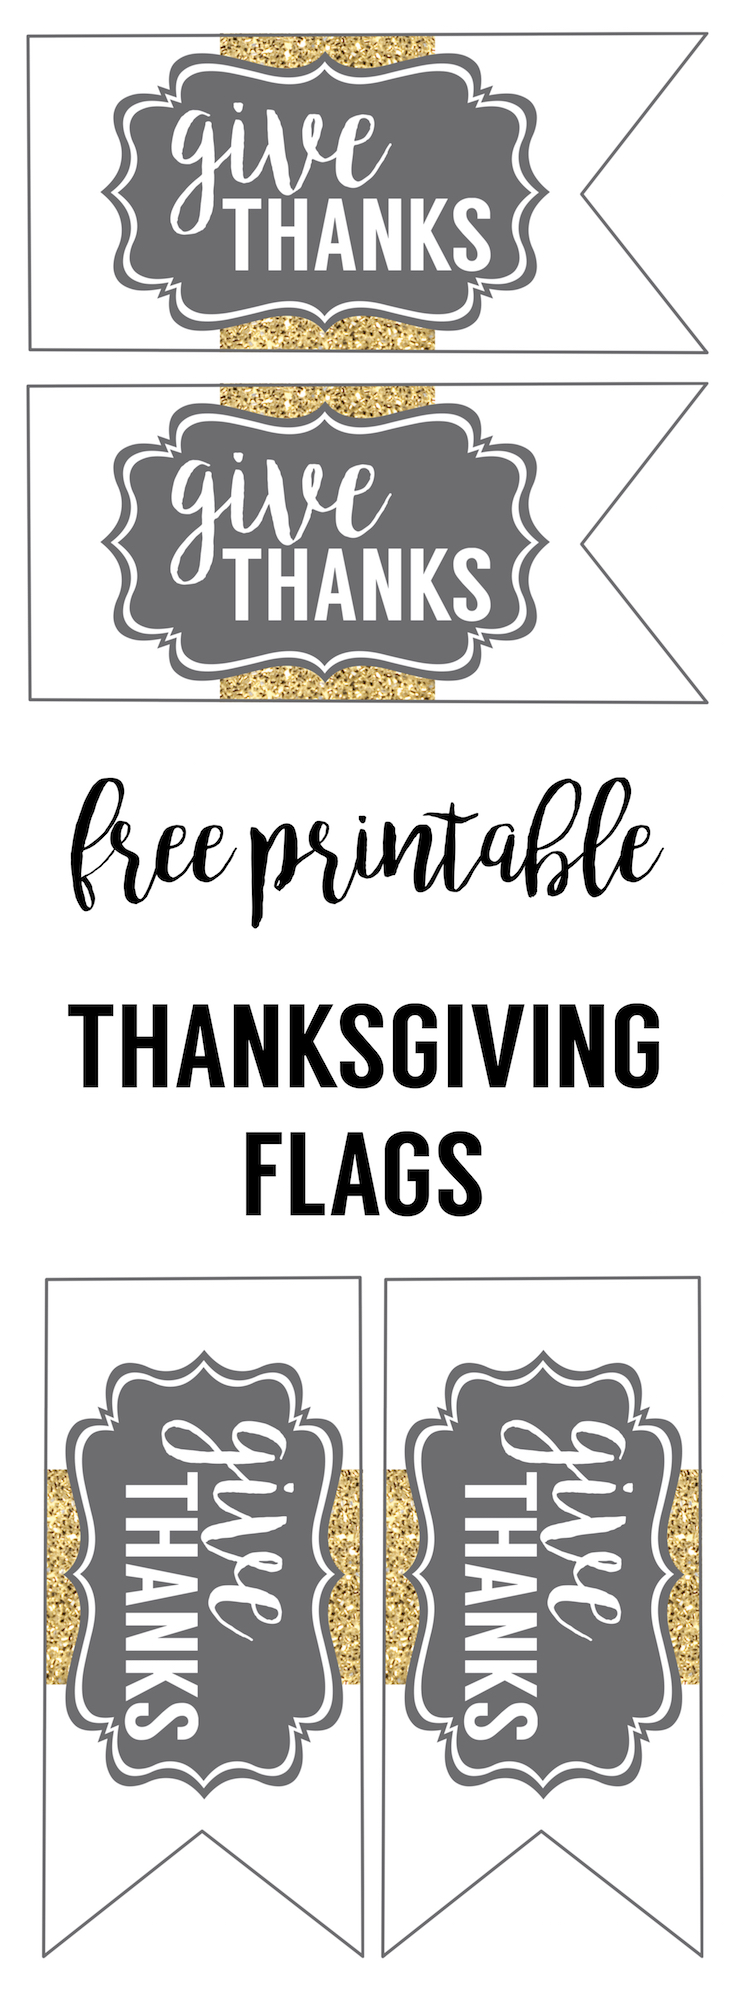 Free Printable Thanksgiving Flags. Print these cupcake topper-like flags to decorate your Thanksgiving desserts or your Thanksgiving dinner.